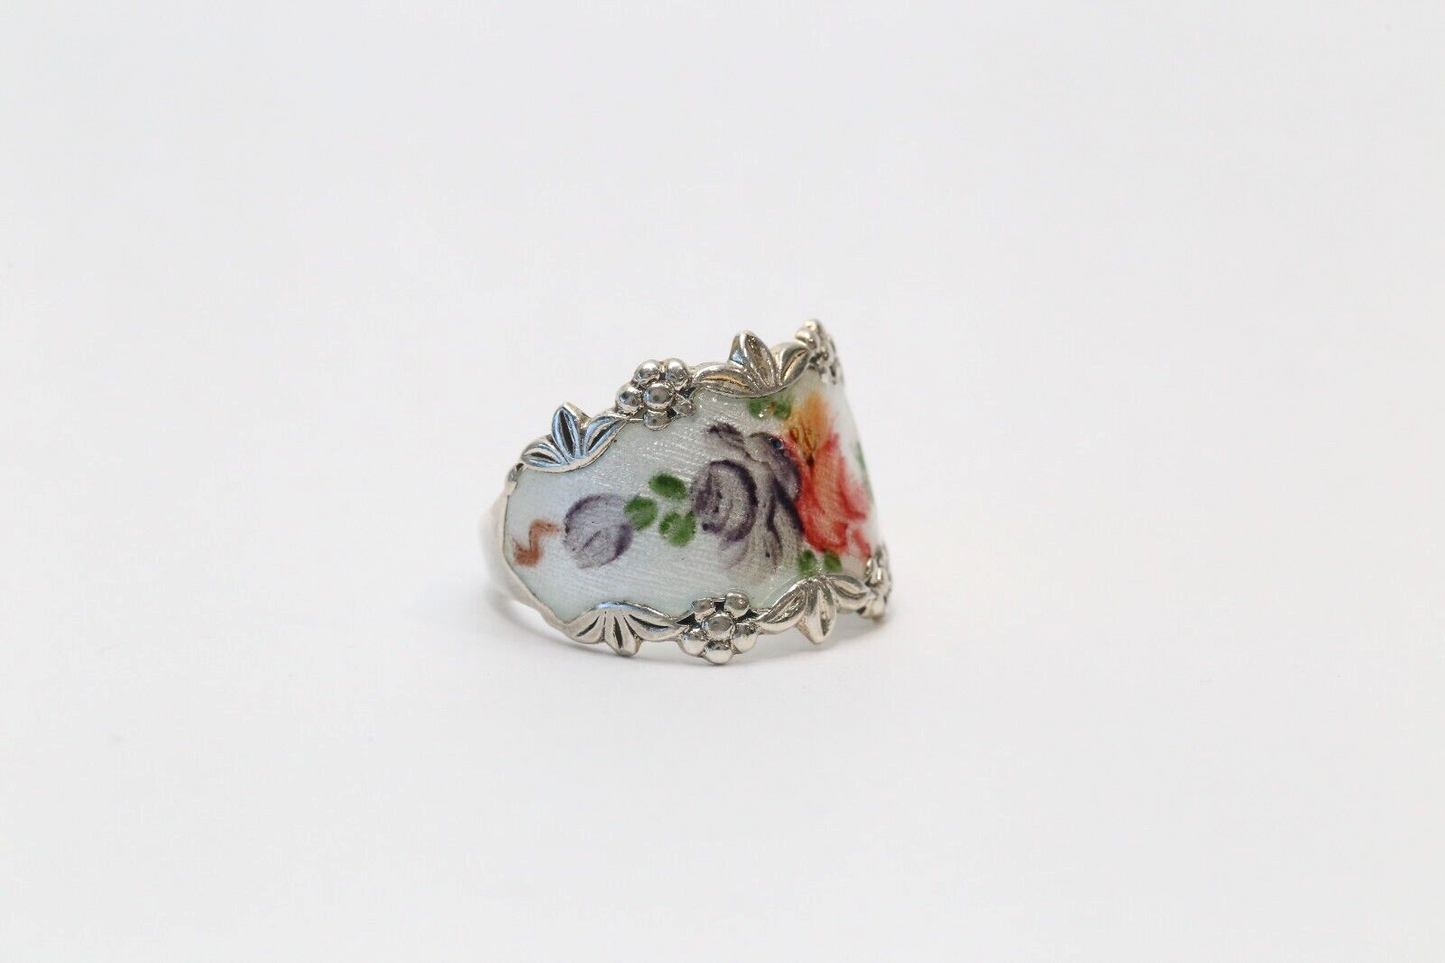 Vintage Sterling Silver Floral Enamel Cigar Band Ring with Pink & Purple Roses, Size 10 - 8.2g